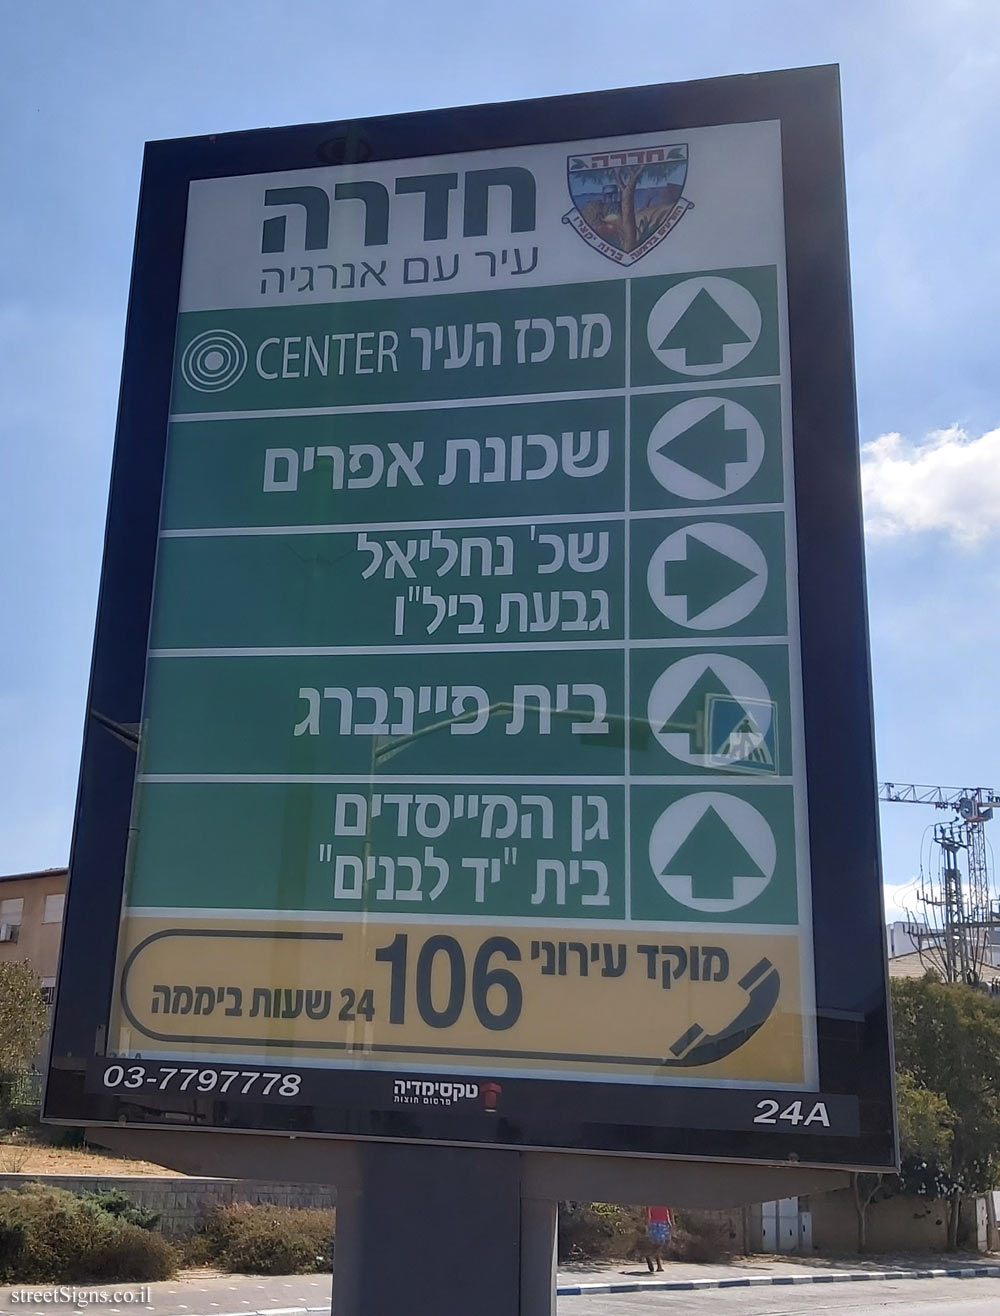 Hadera - a direction sign pointing to places in the city